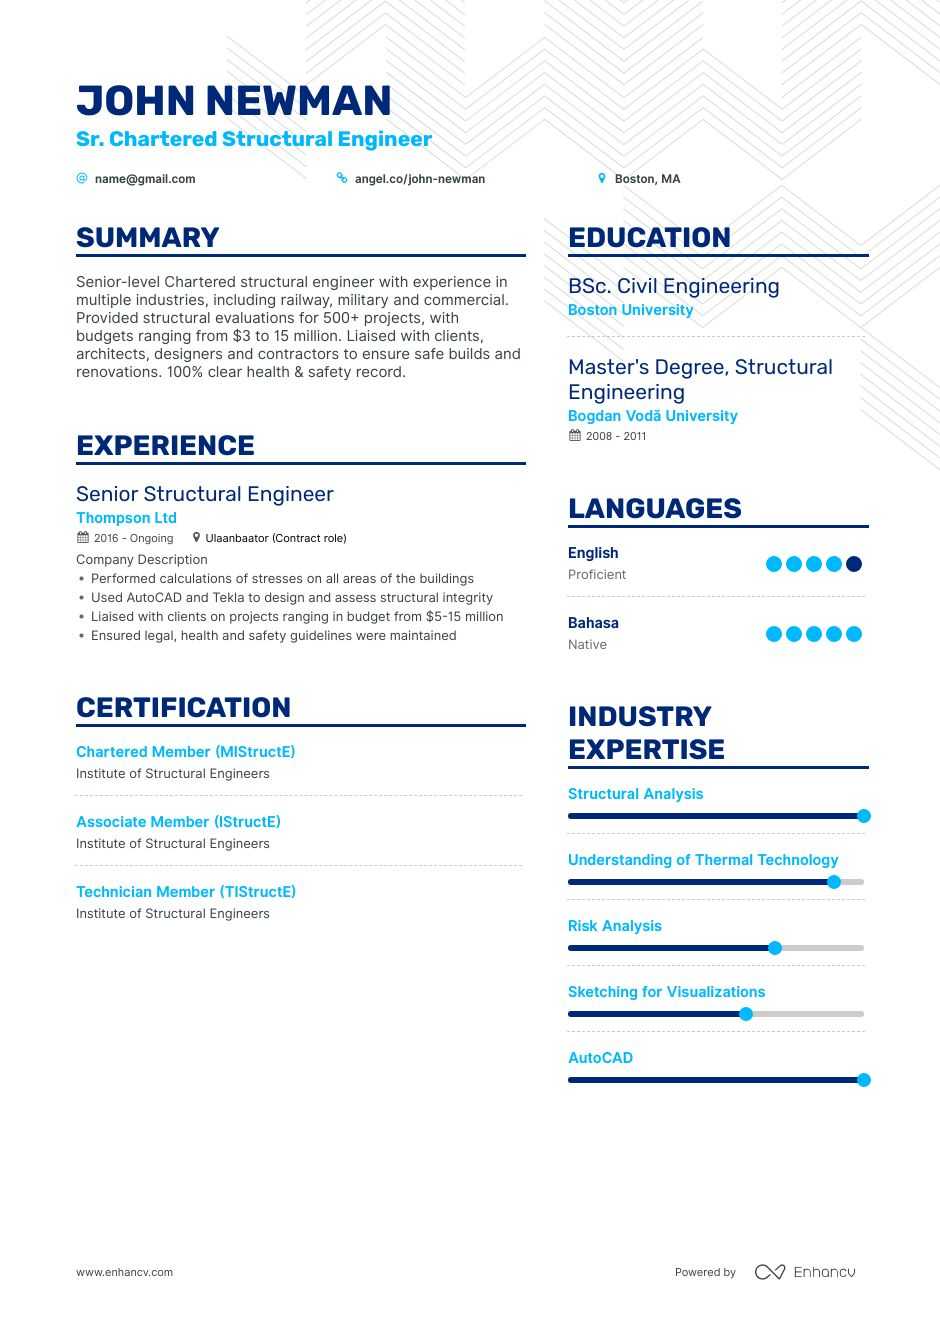 Structural Engineer Resume Examples | Do's and Don'ts for ...